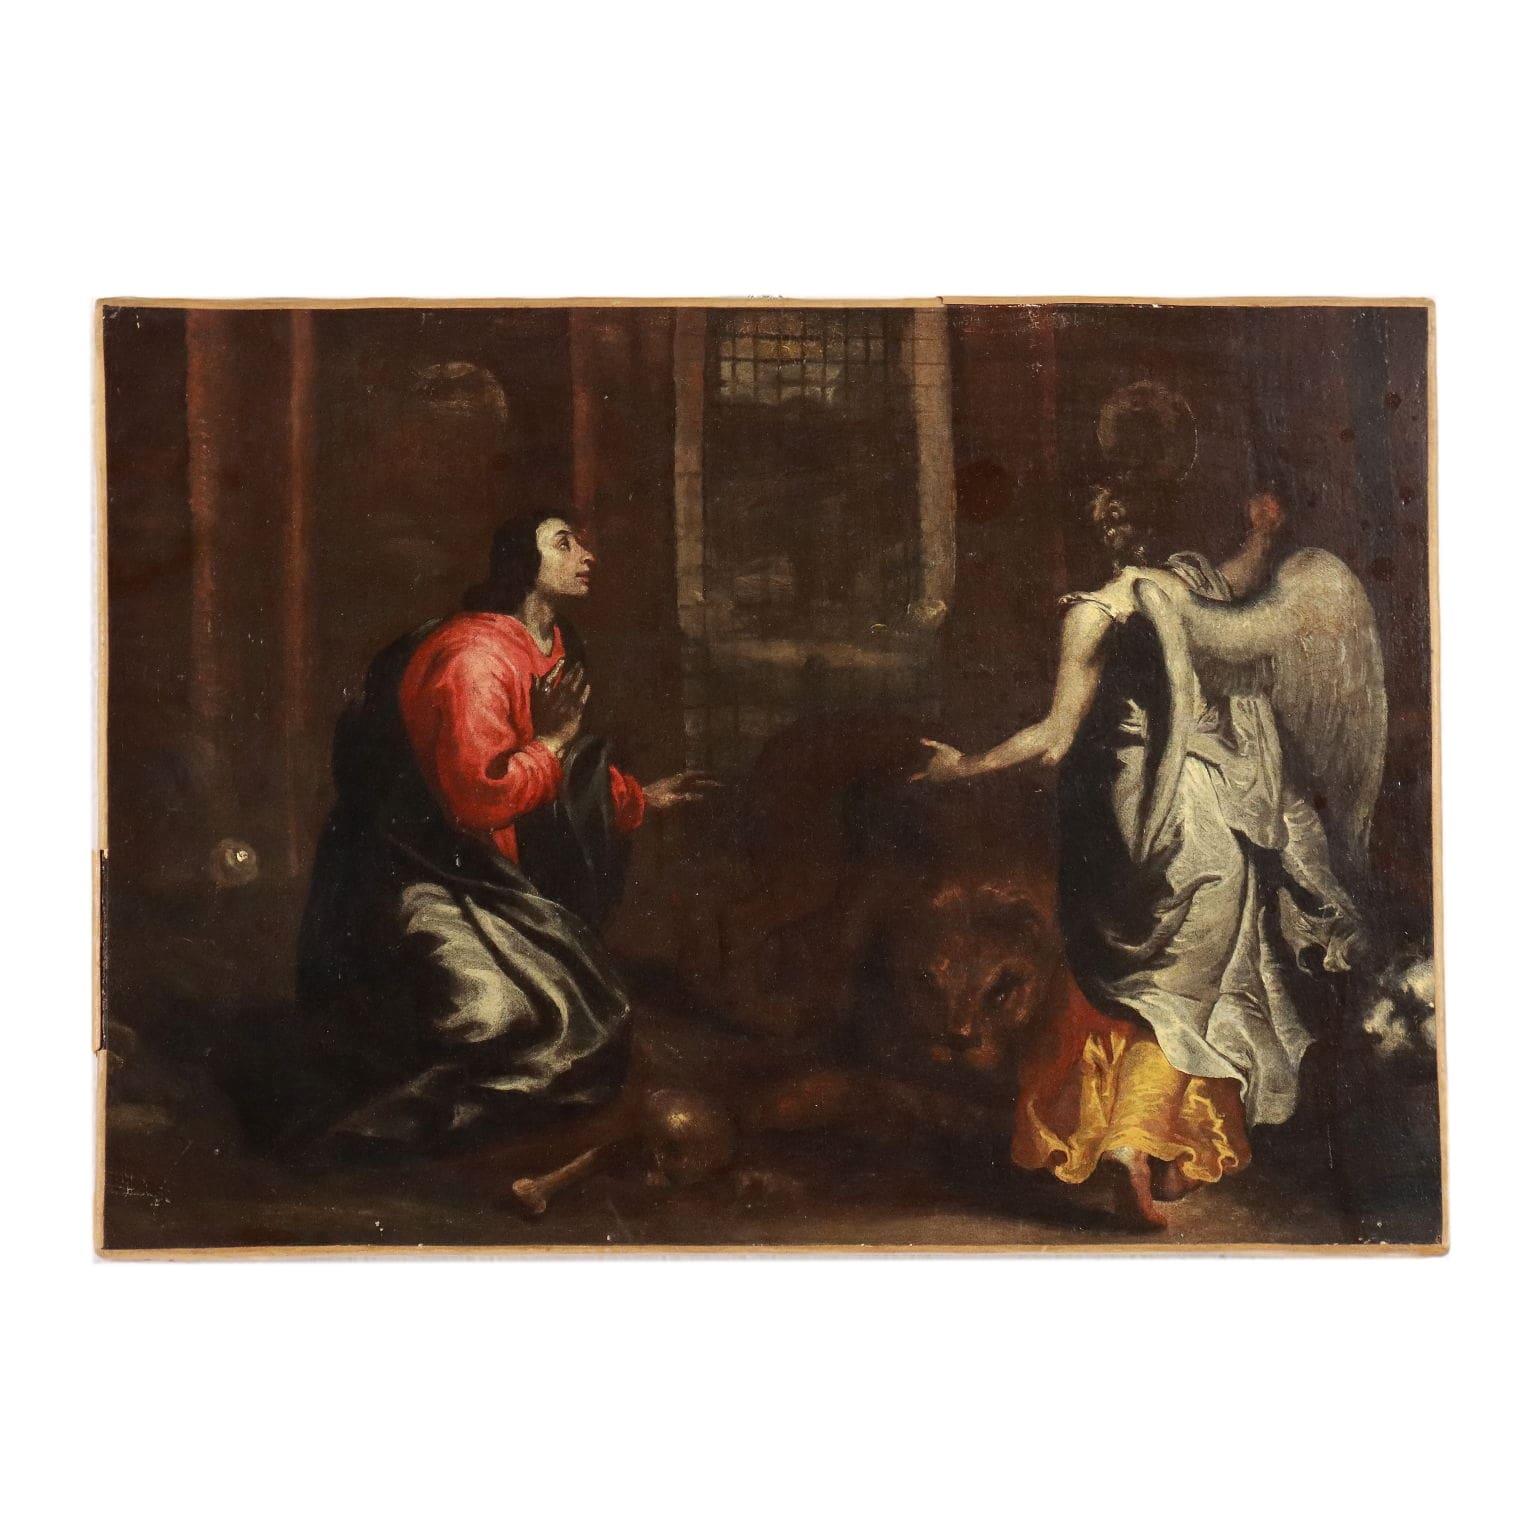 Unknown Figurative Painting - Painting with Daniel in the Pit of Lions, 17th century